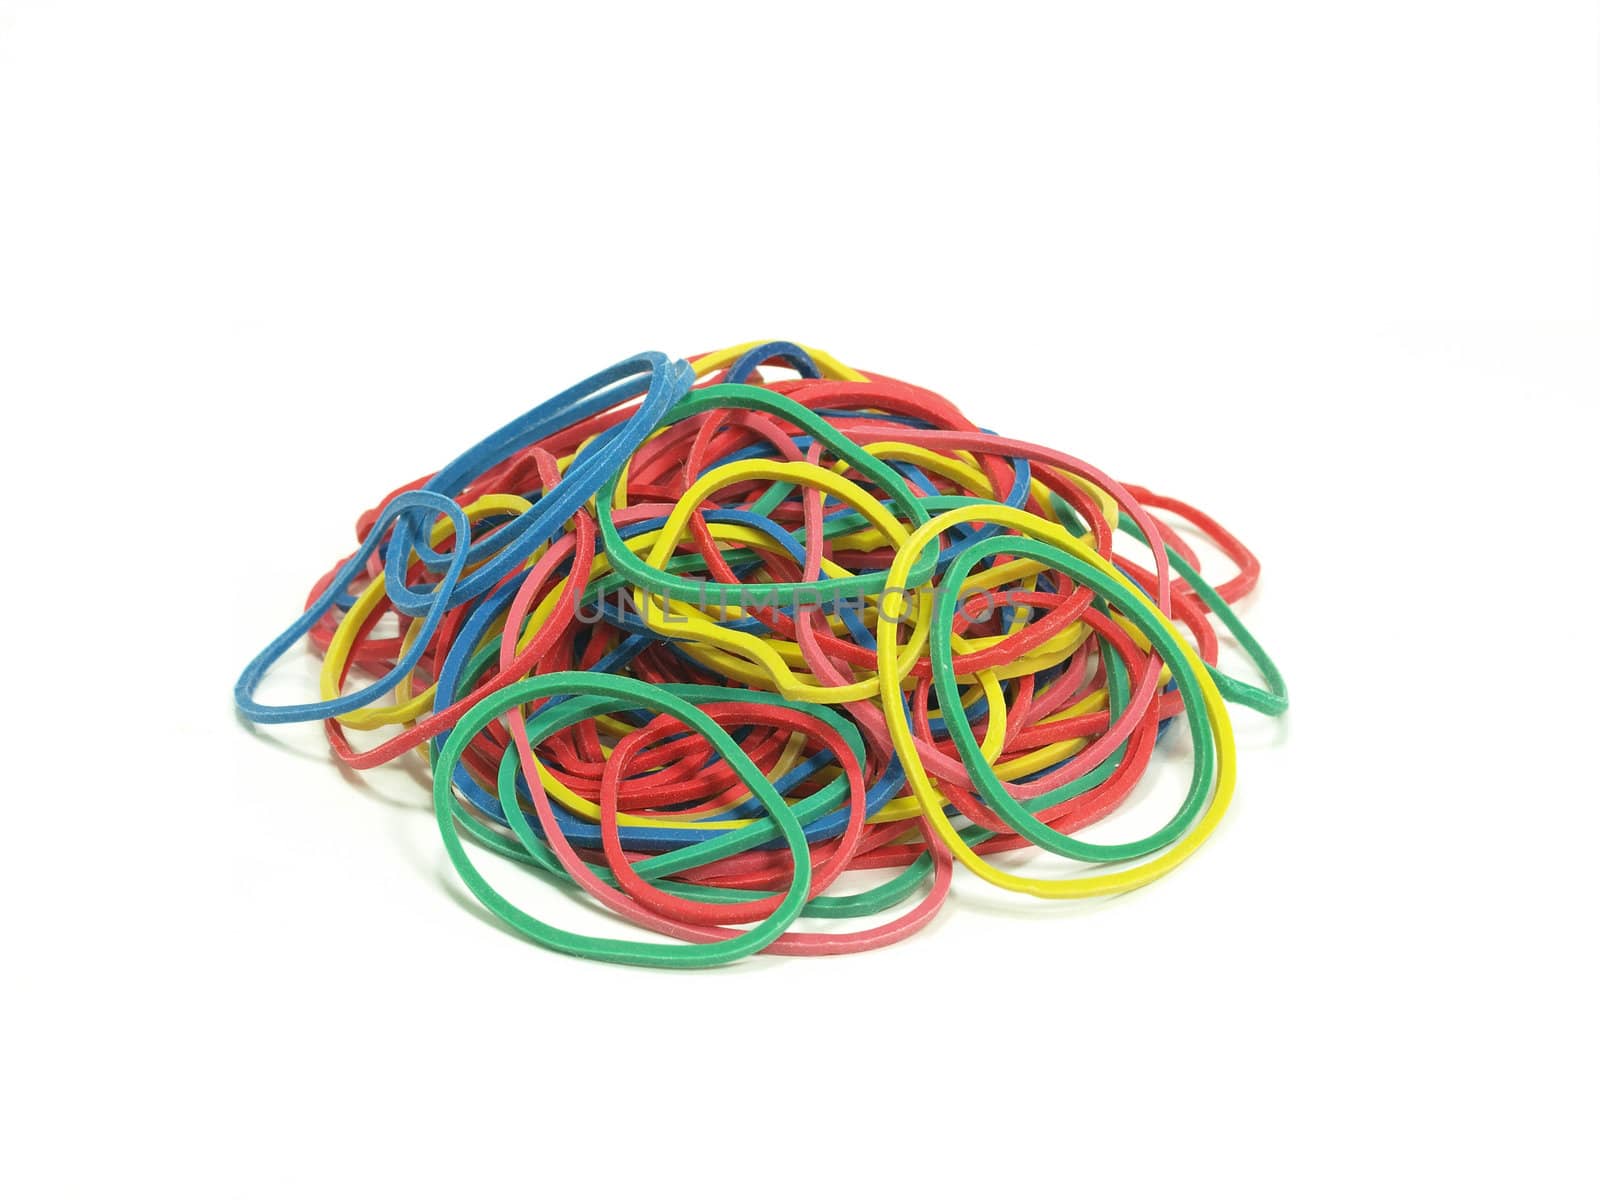 rubber bands by Ric510